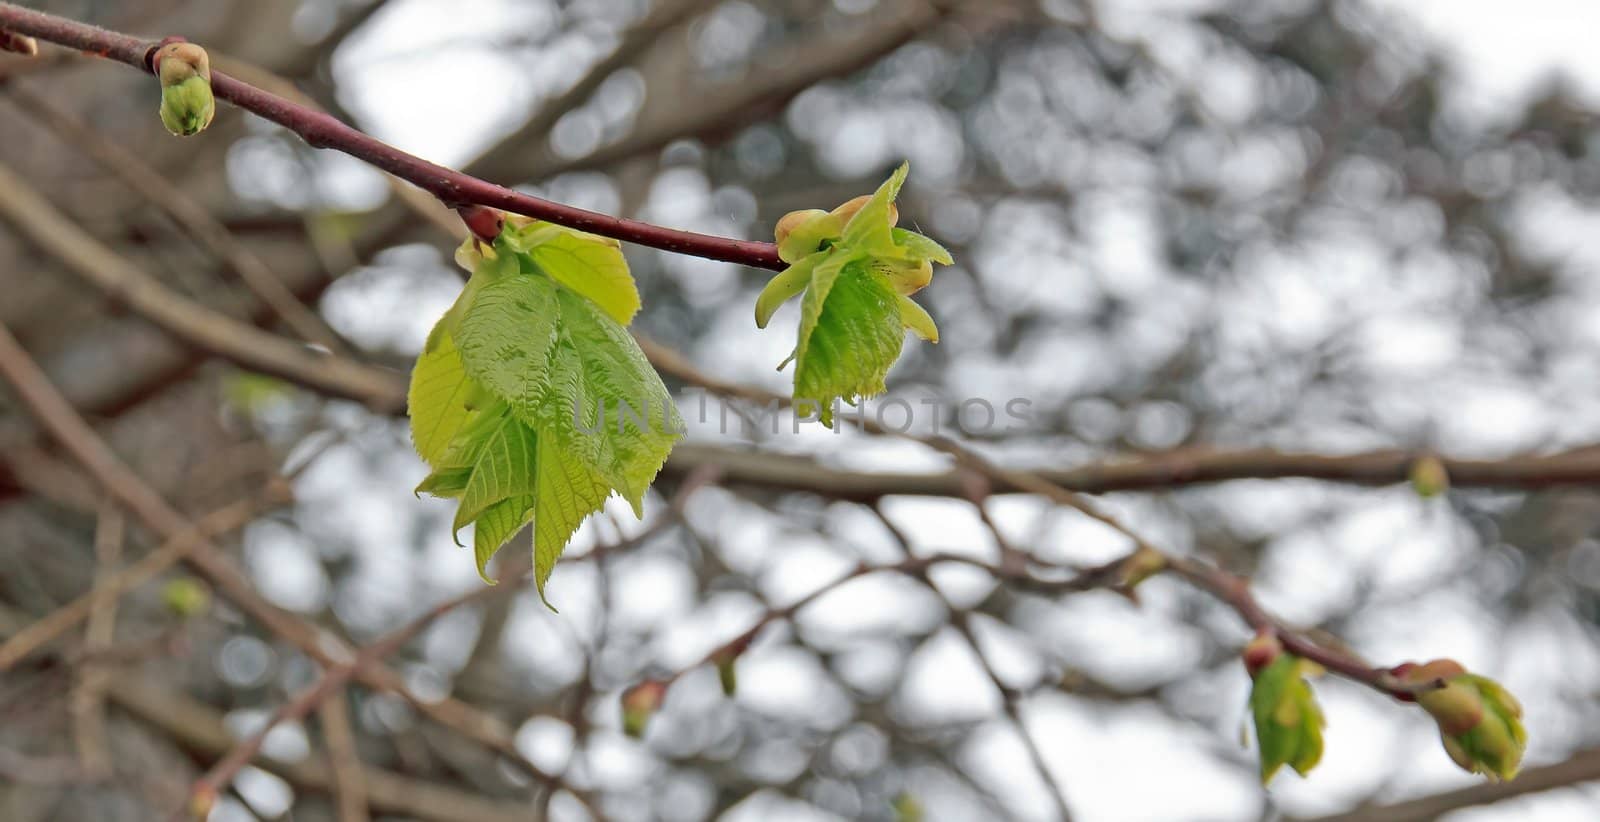 leaf out of its green bud by neko92vl